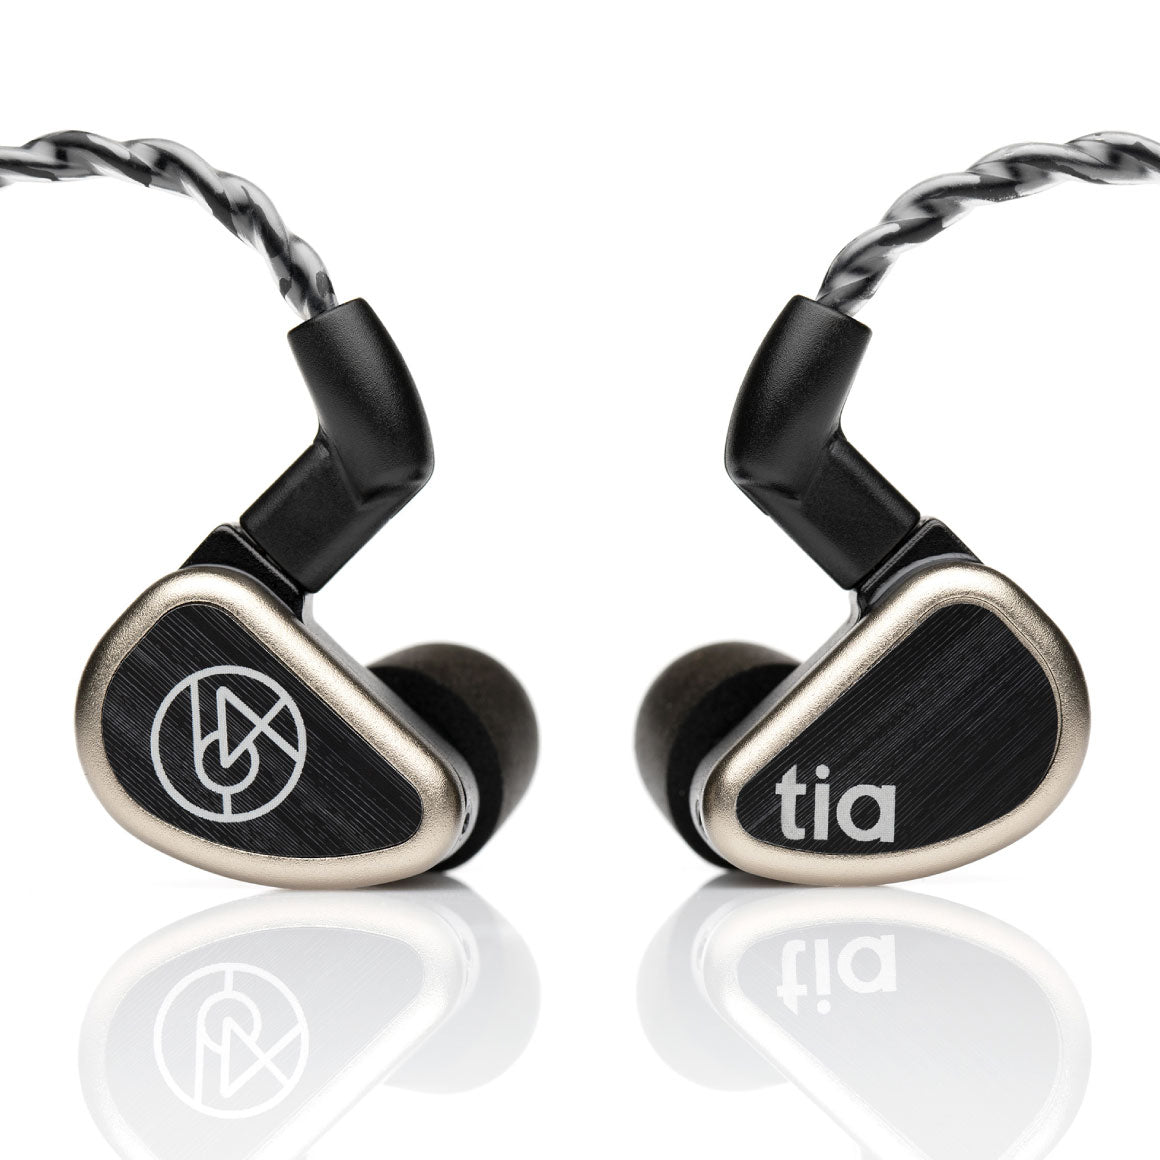 Astell & Kern Pathfinder - Casque Intra-Auriculaire filaire